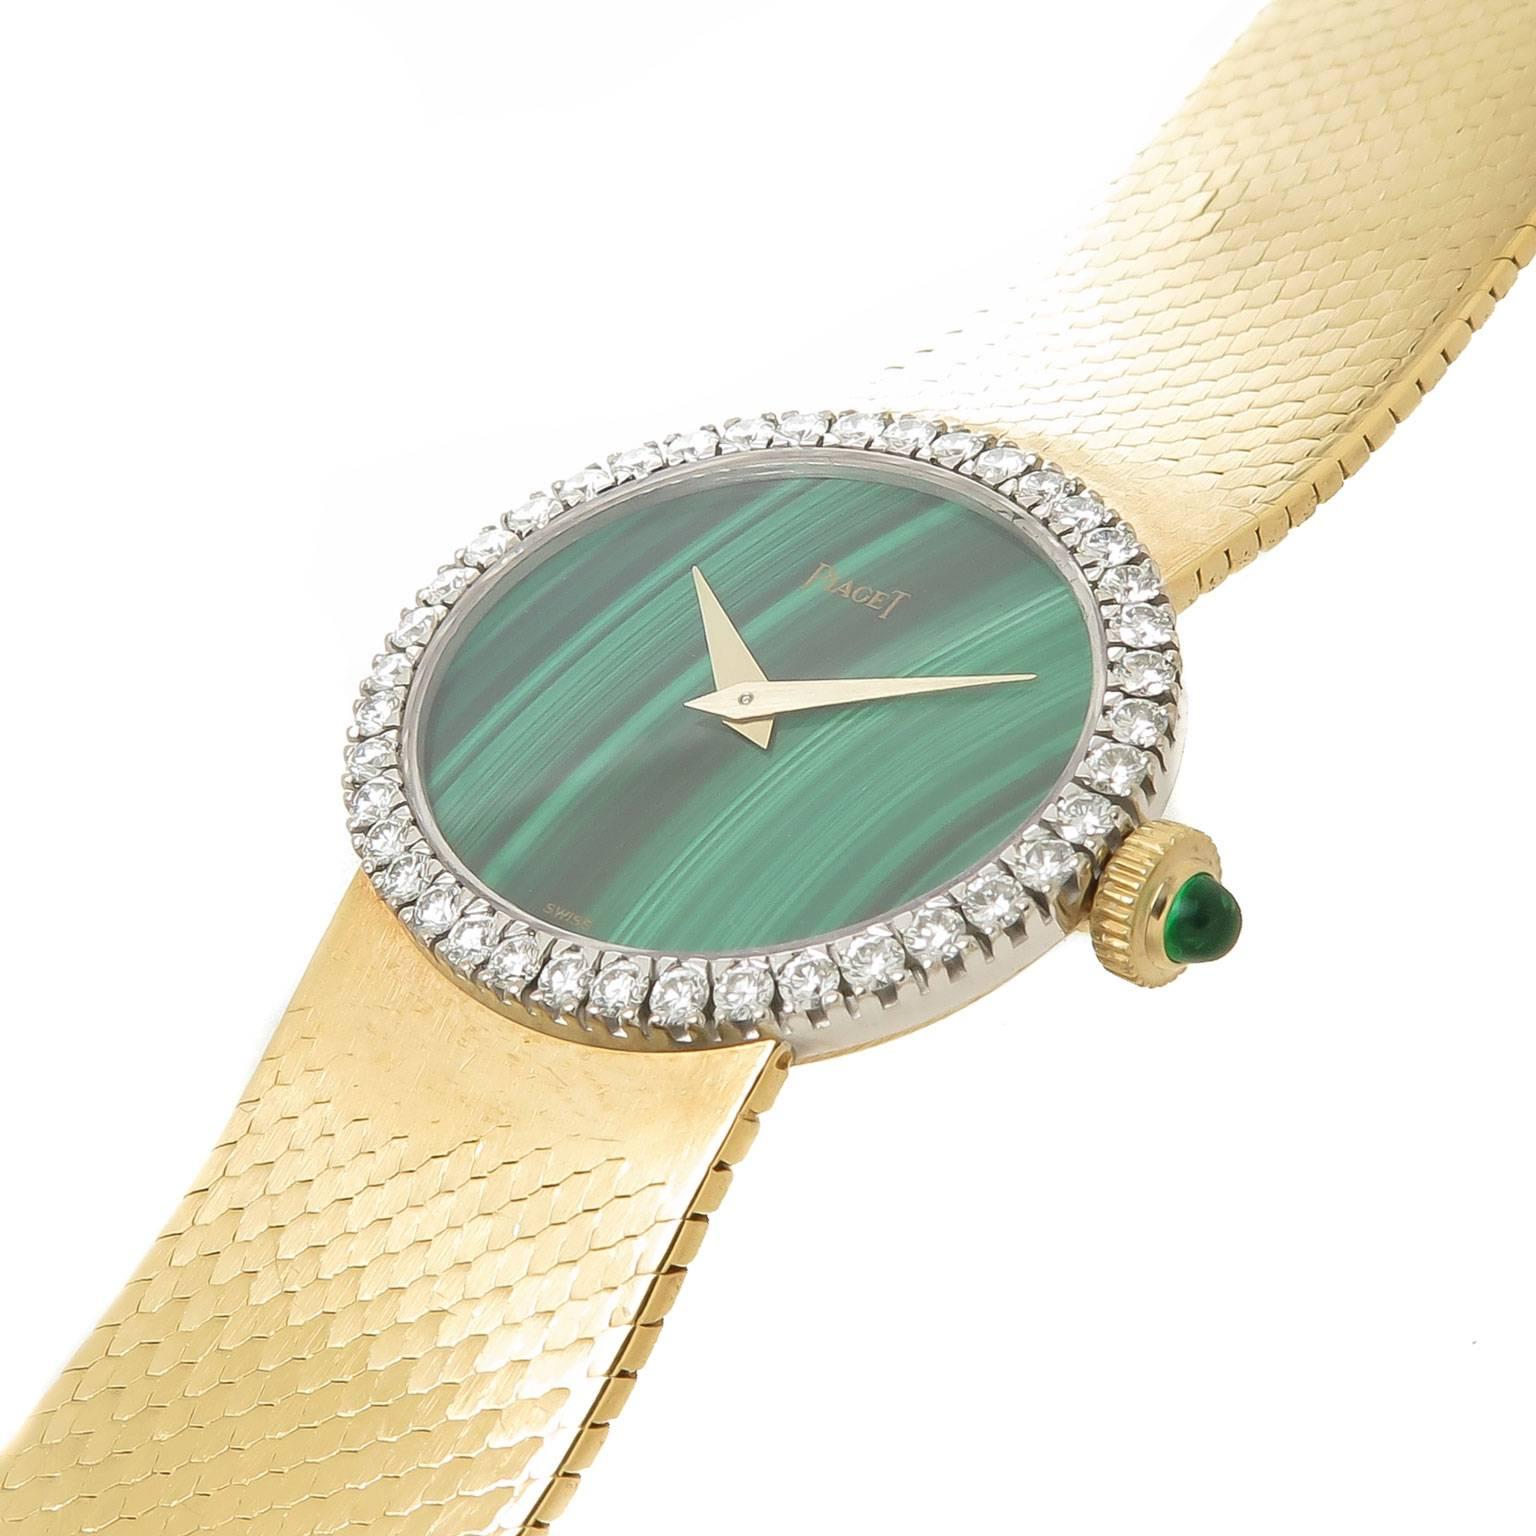 Circa 1970s Piaget, 27 X 24 MM 18K yellow Gold Oval case, with a Factory Diamond set Bezel of Round Brilliant cut Stones that weigh a total 1 of Carat. 17 Jewel Manual wind, mechanical movement. Malachite stone Dial With gold hands and an Emerald